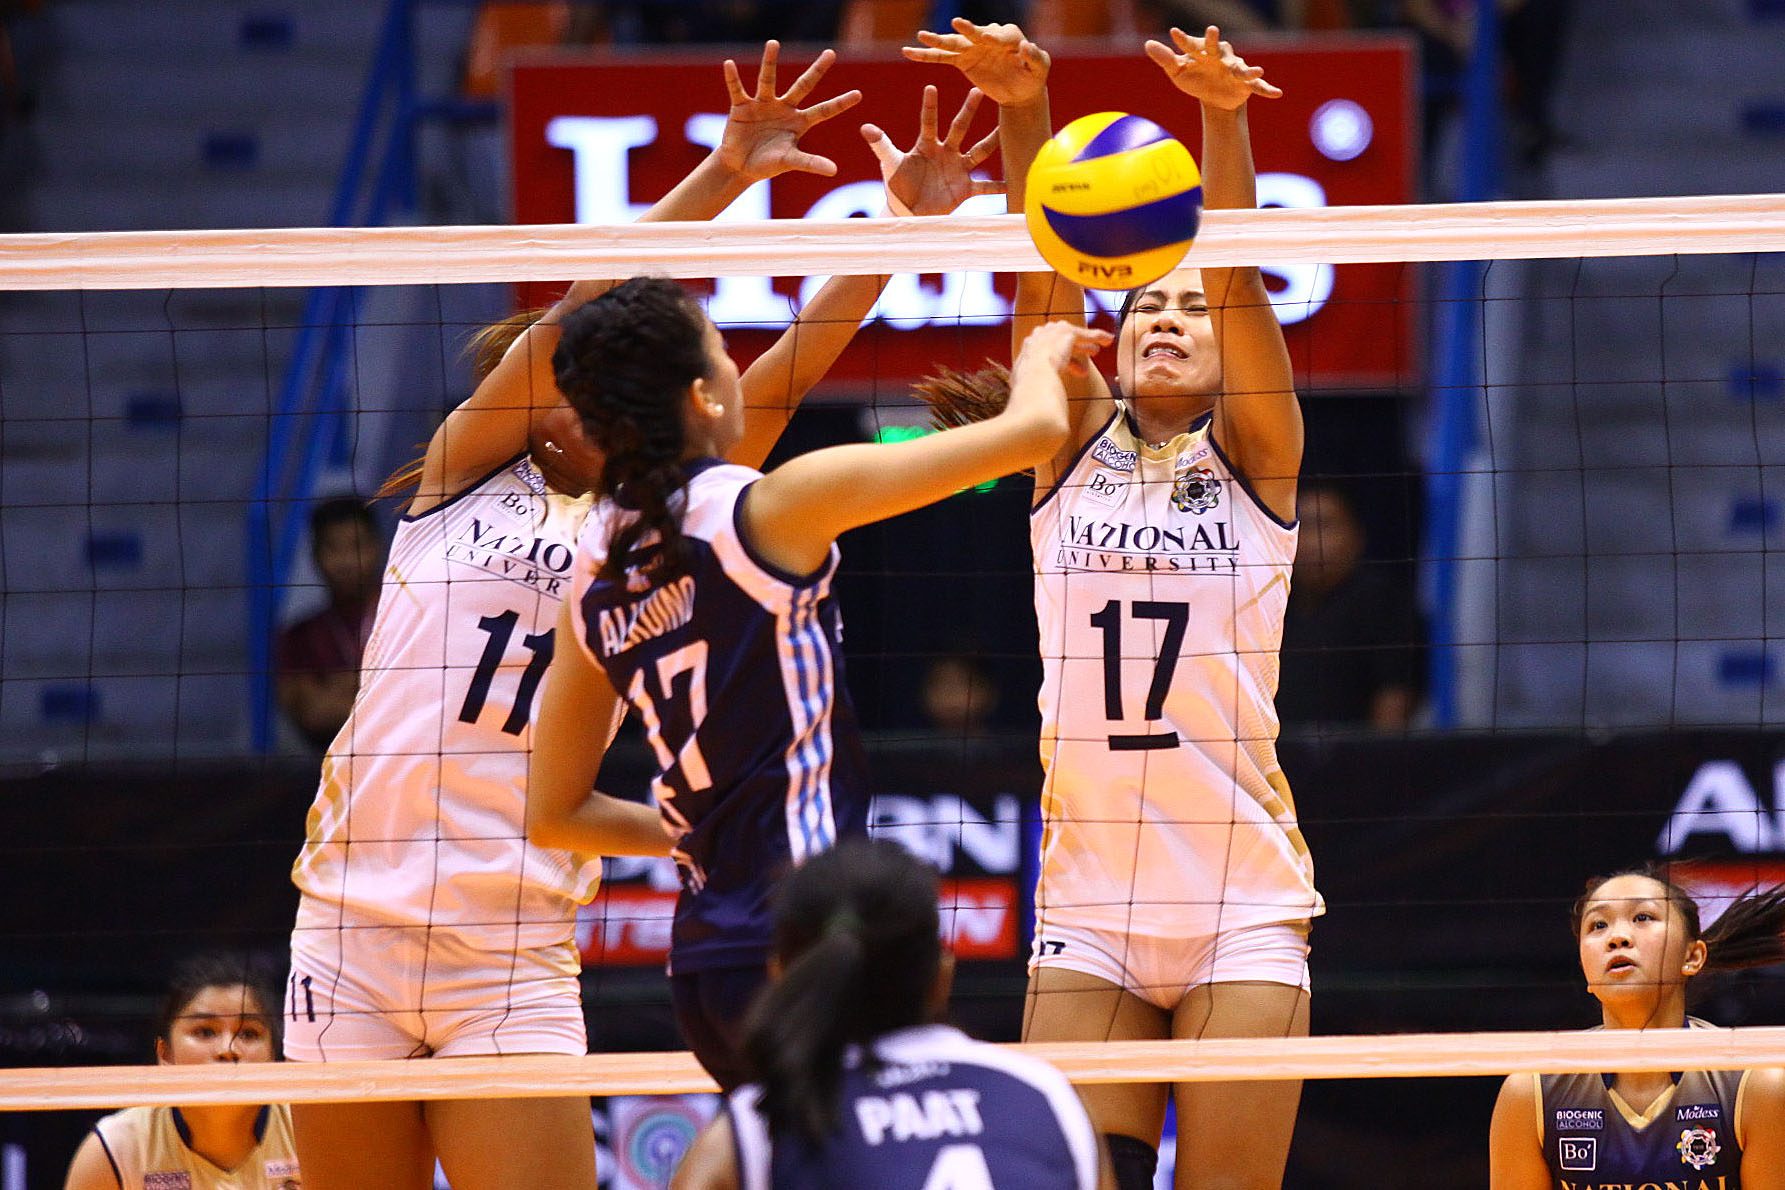 NU crushes Adamson in straight sets to open second round